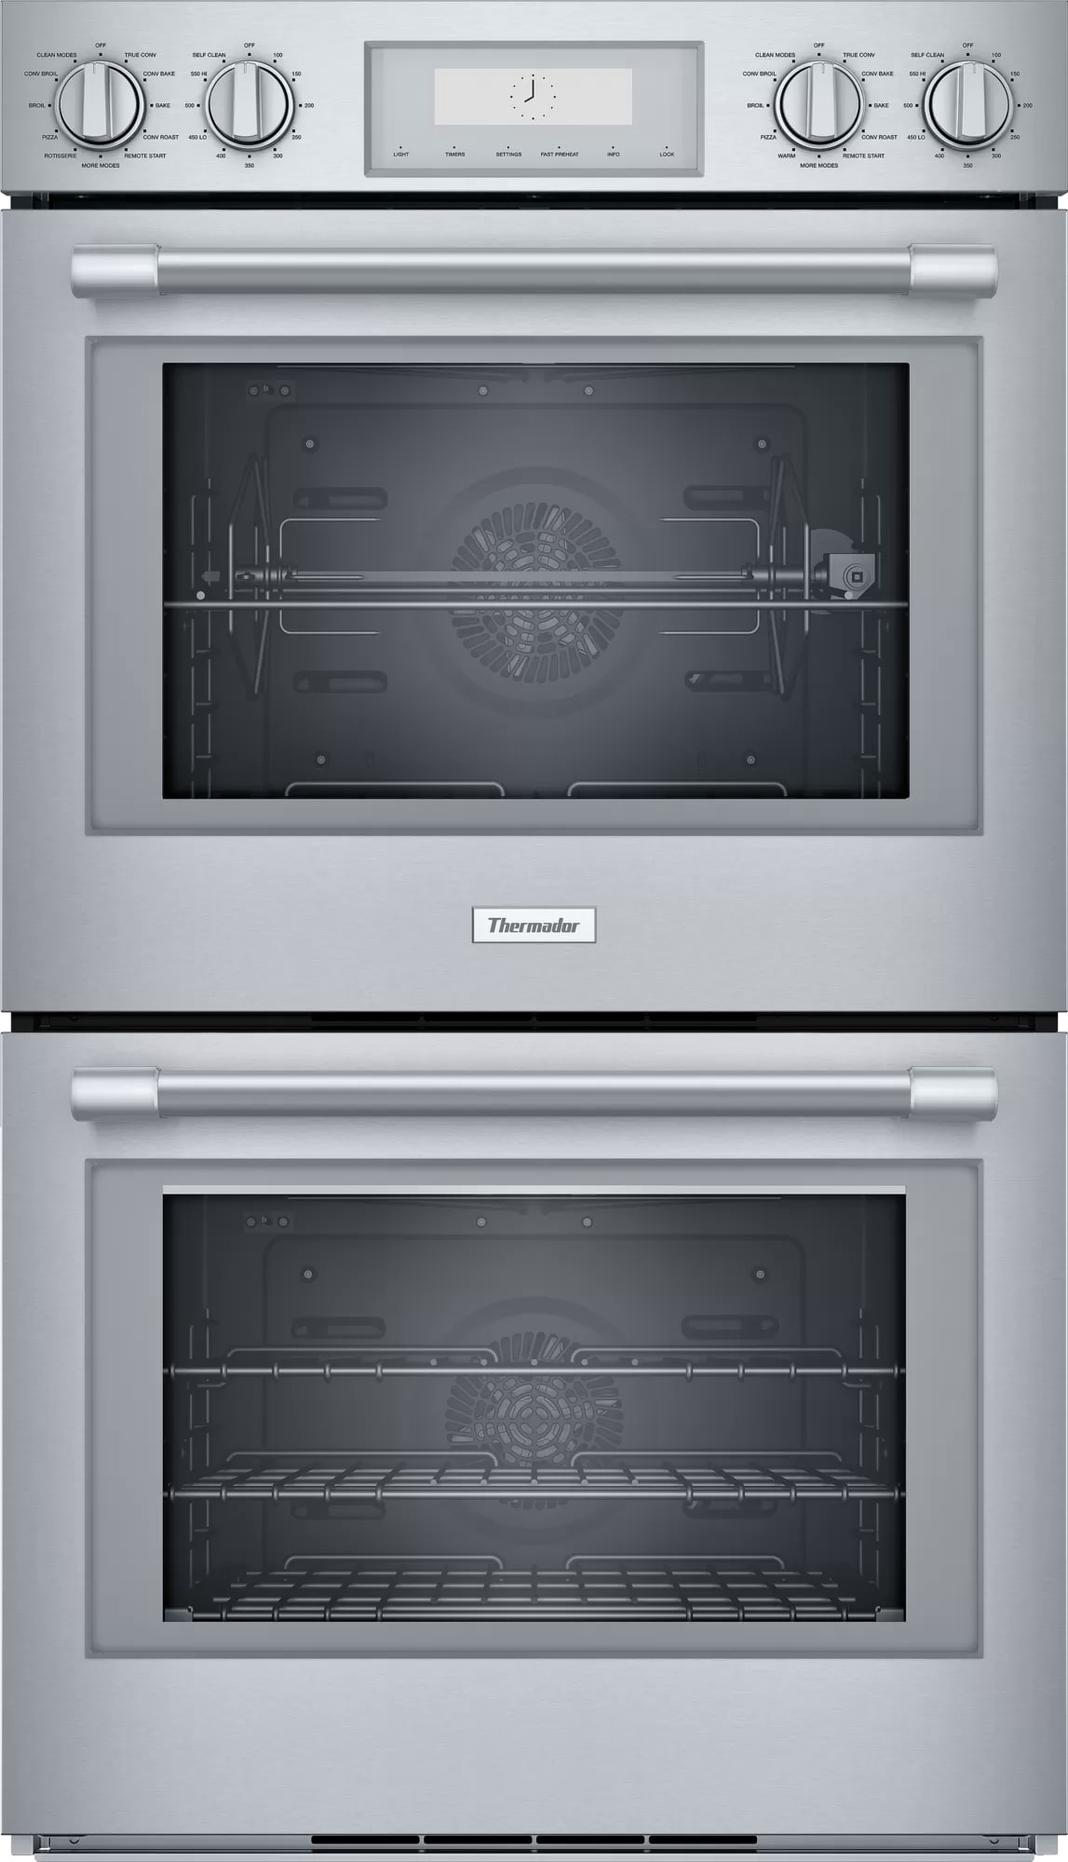 Thermador - 9 cu. ft Double Wall Oven in Stainless - POD302W